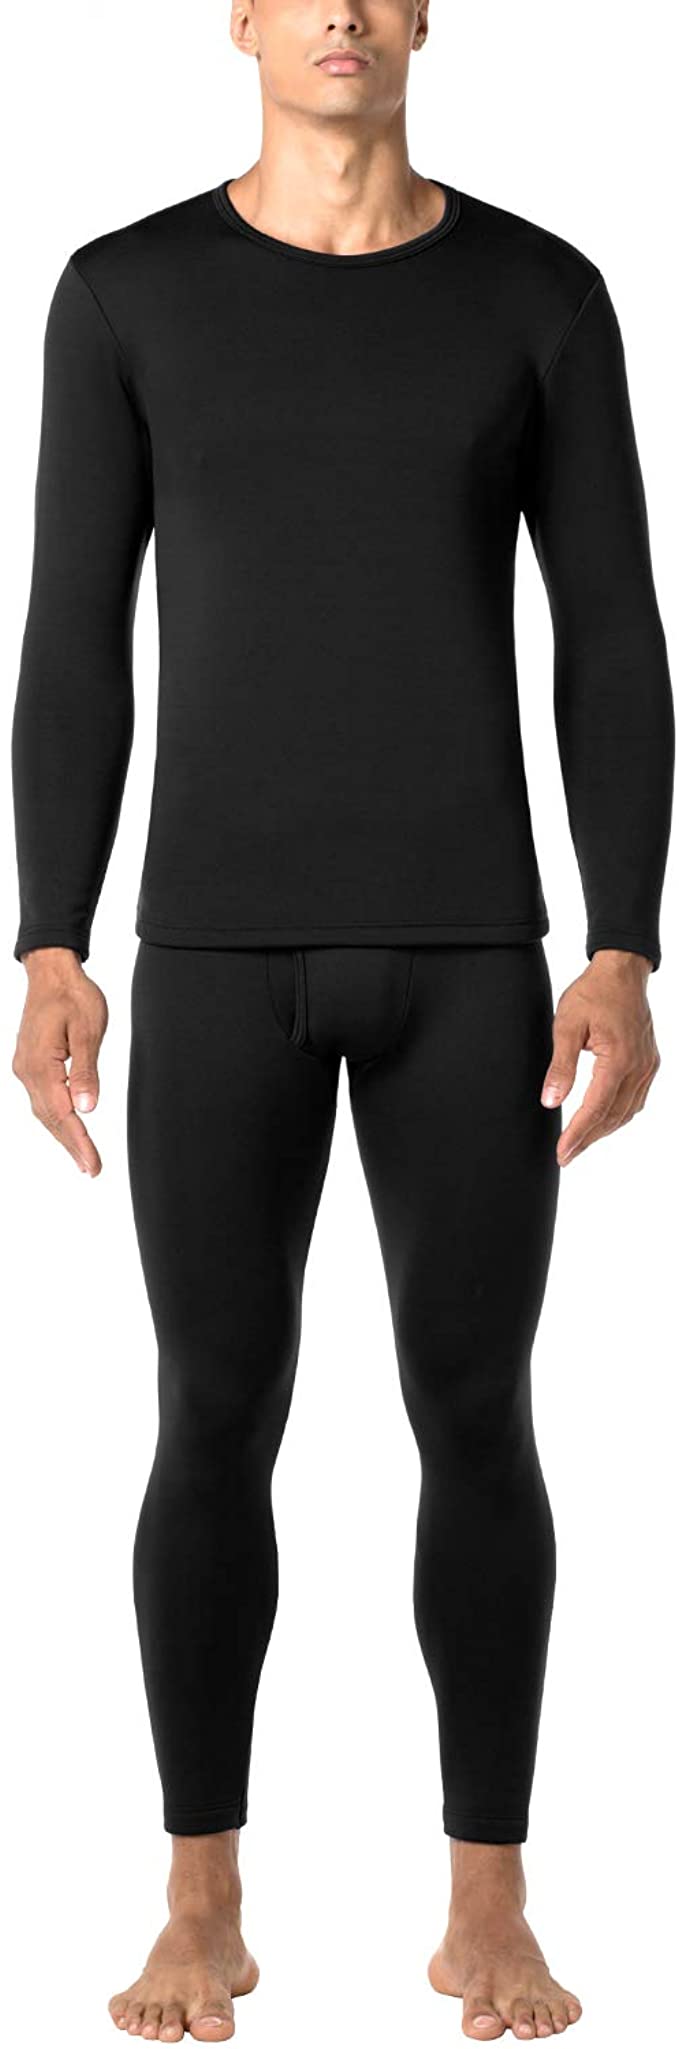 LAPASA Men's Fleece Lined Thermal Underwear Set, Warm Long Sleeve Long Johns Top and Bottom, Base Layer Set Light/Mid/Heavy Weight （Thermoflux M11 M57 M24)